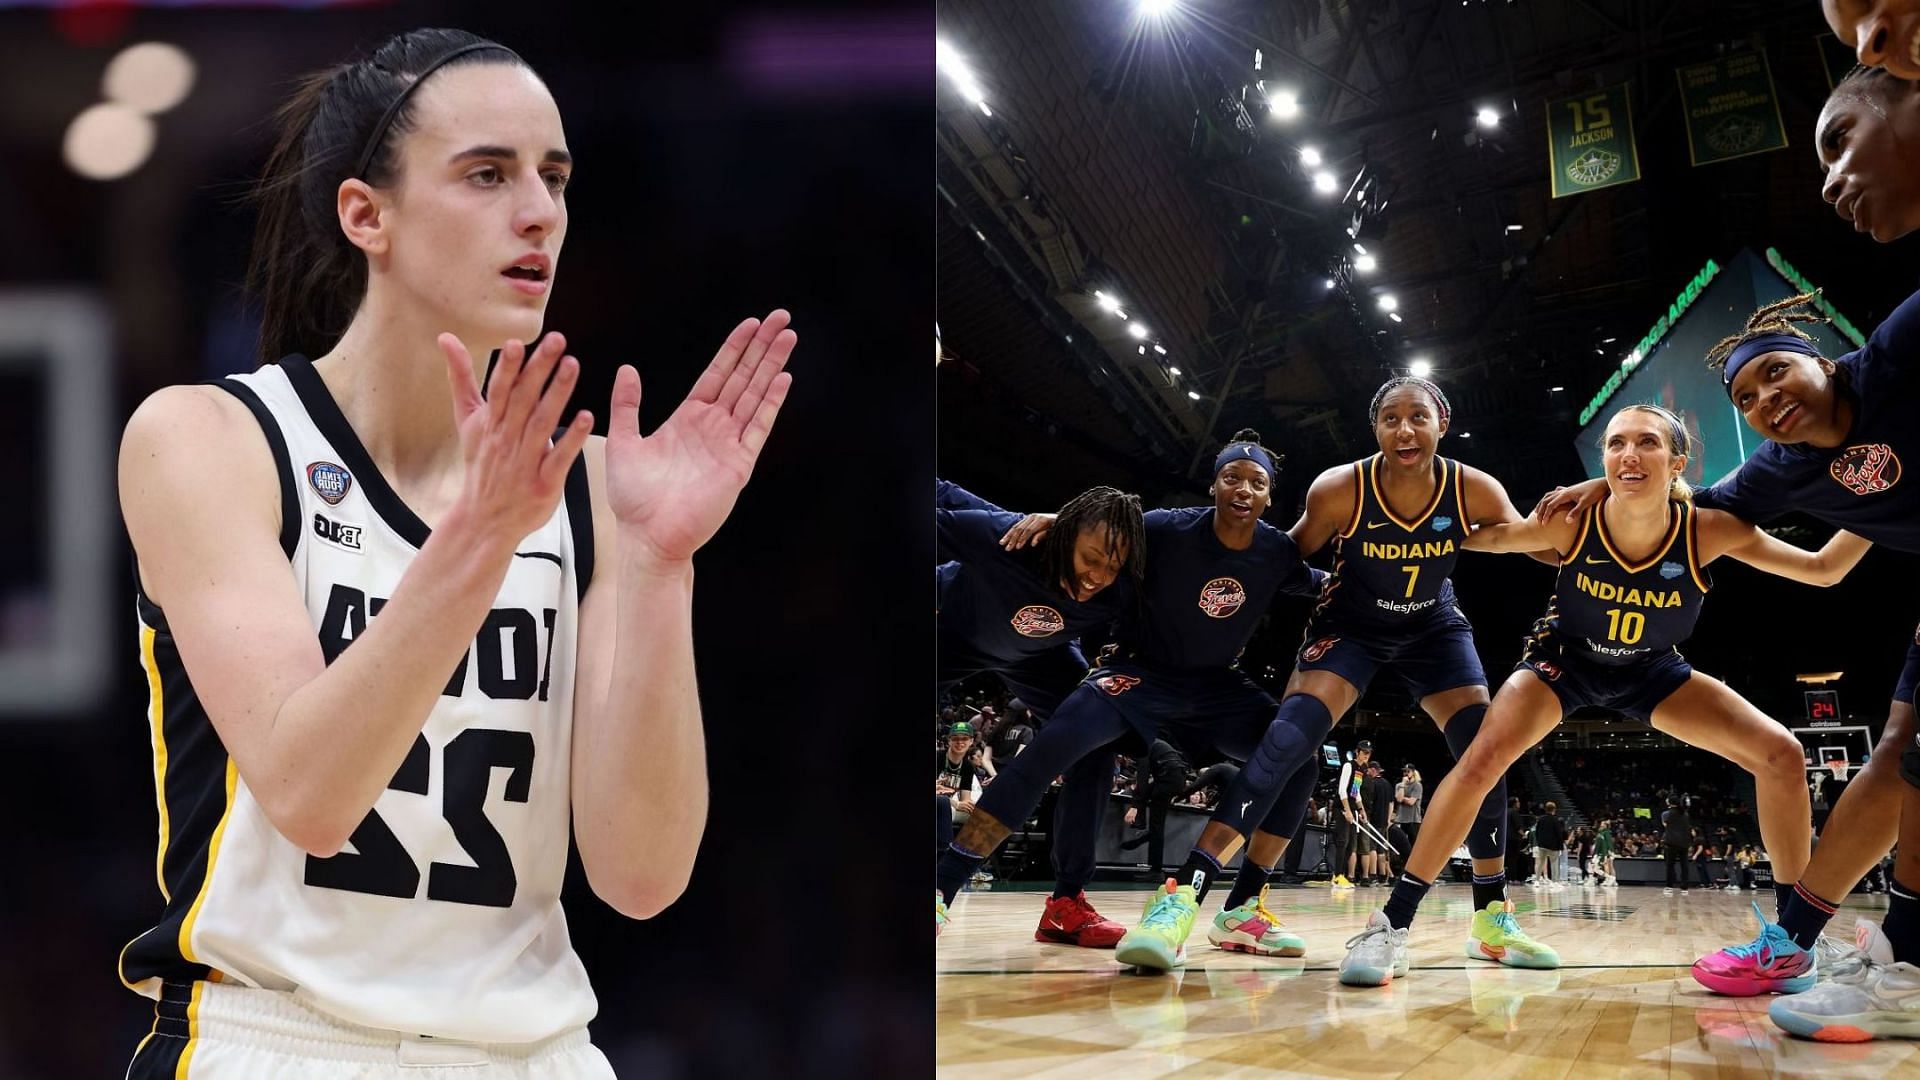 Caitlin Clark is expected to be the No.1 overall pick in the WNBA Draft by the Indiana Fever.